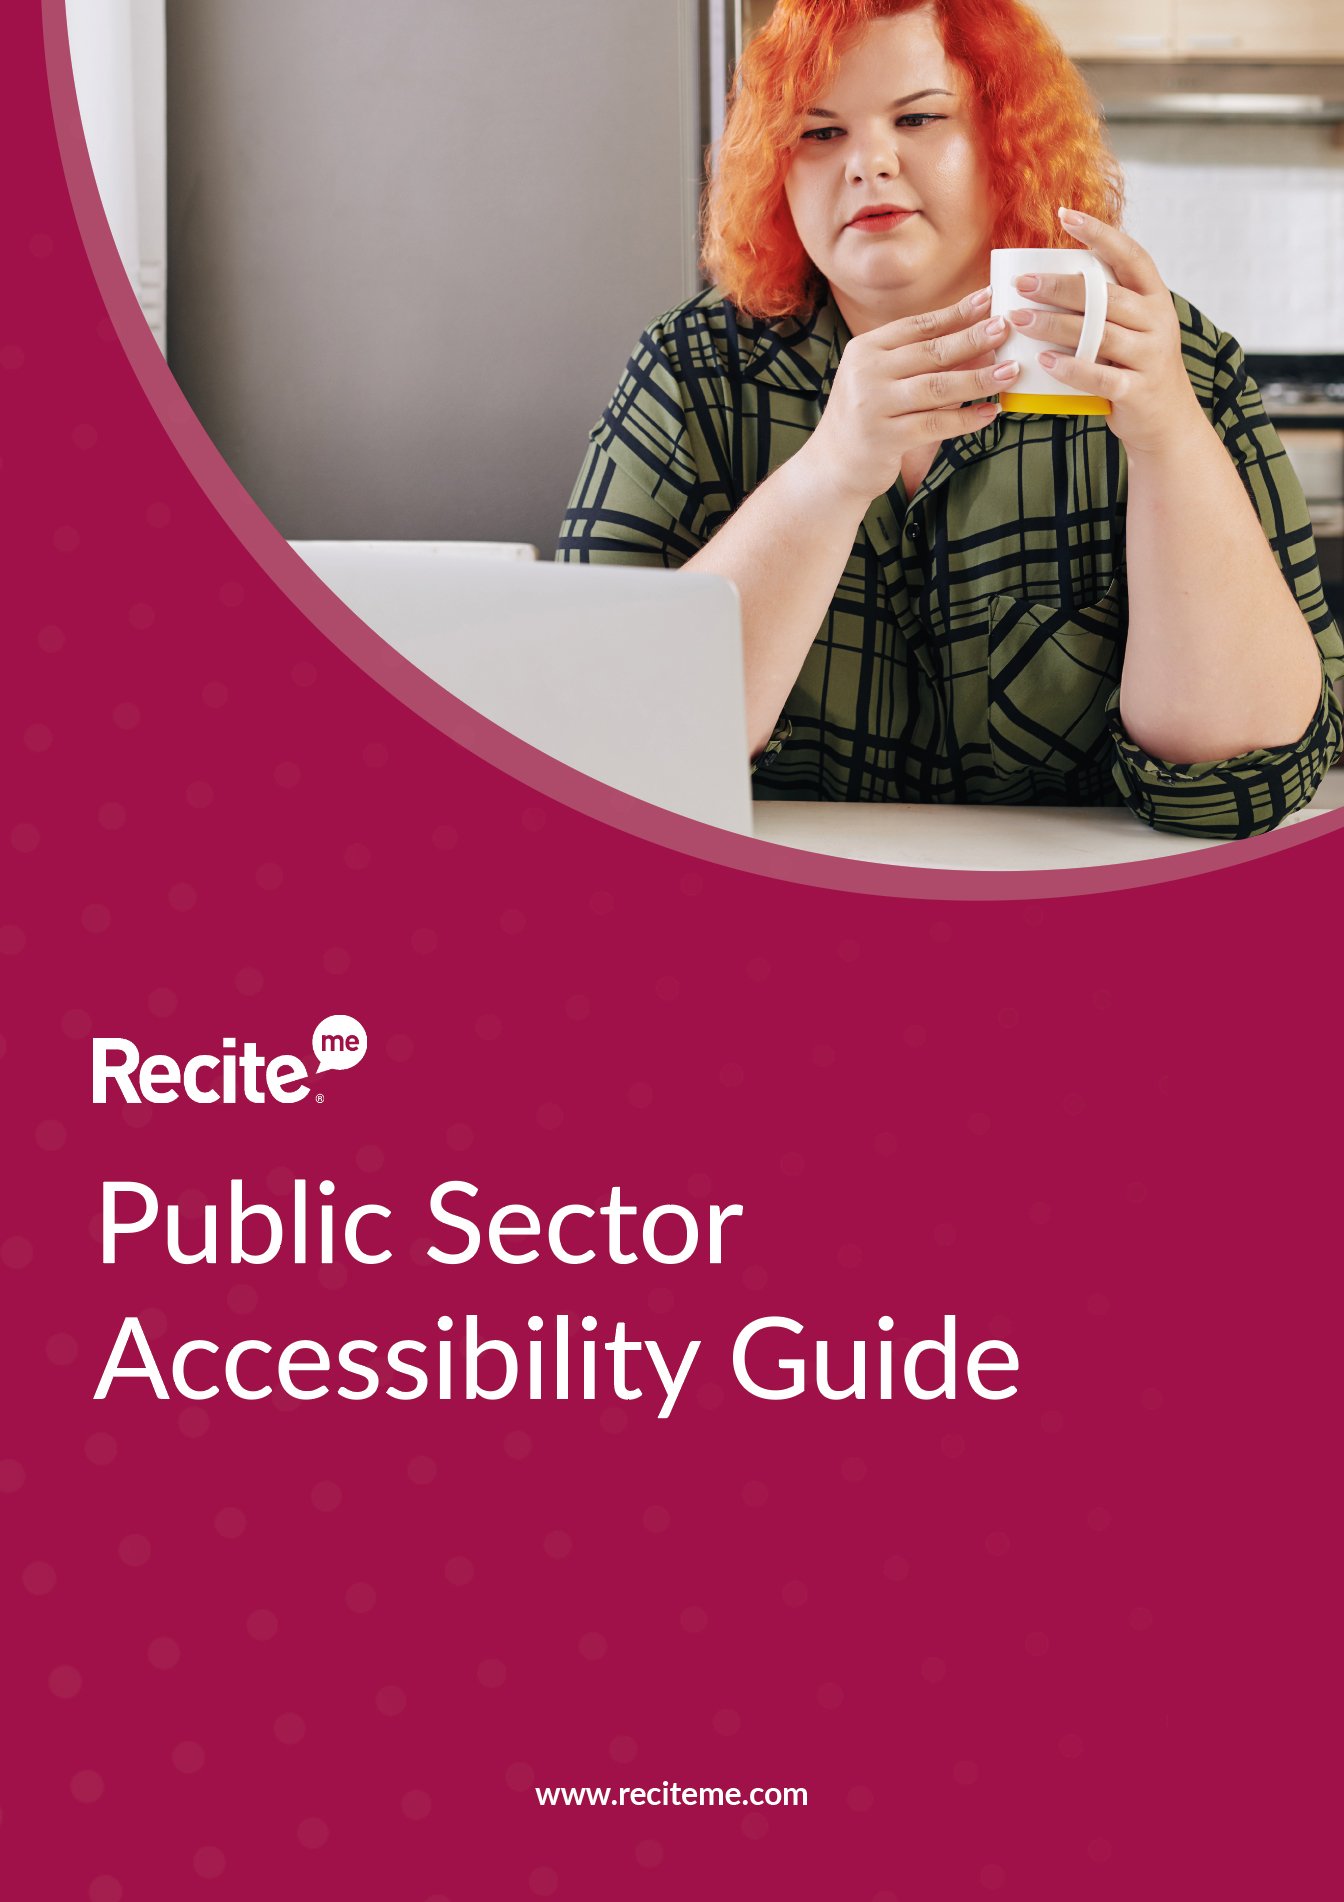 Front cover of the Public Sector Guide